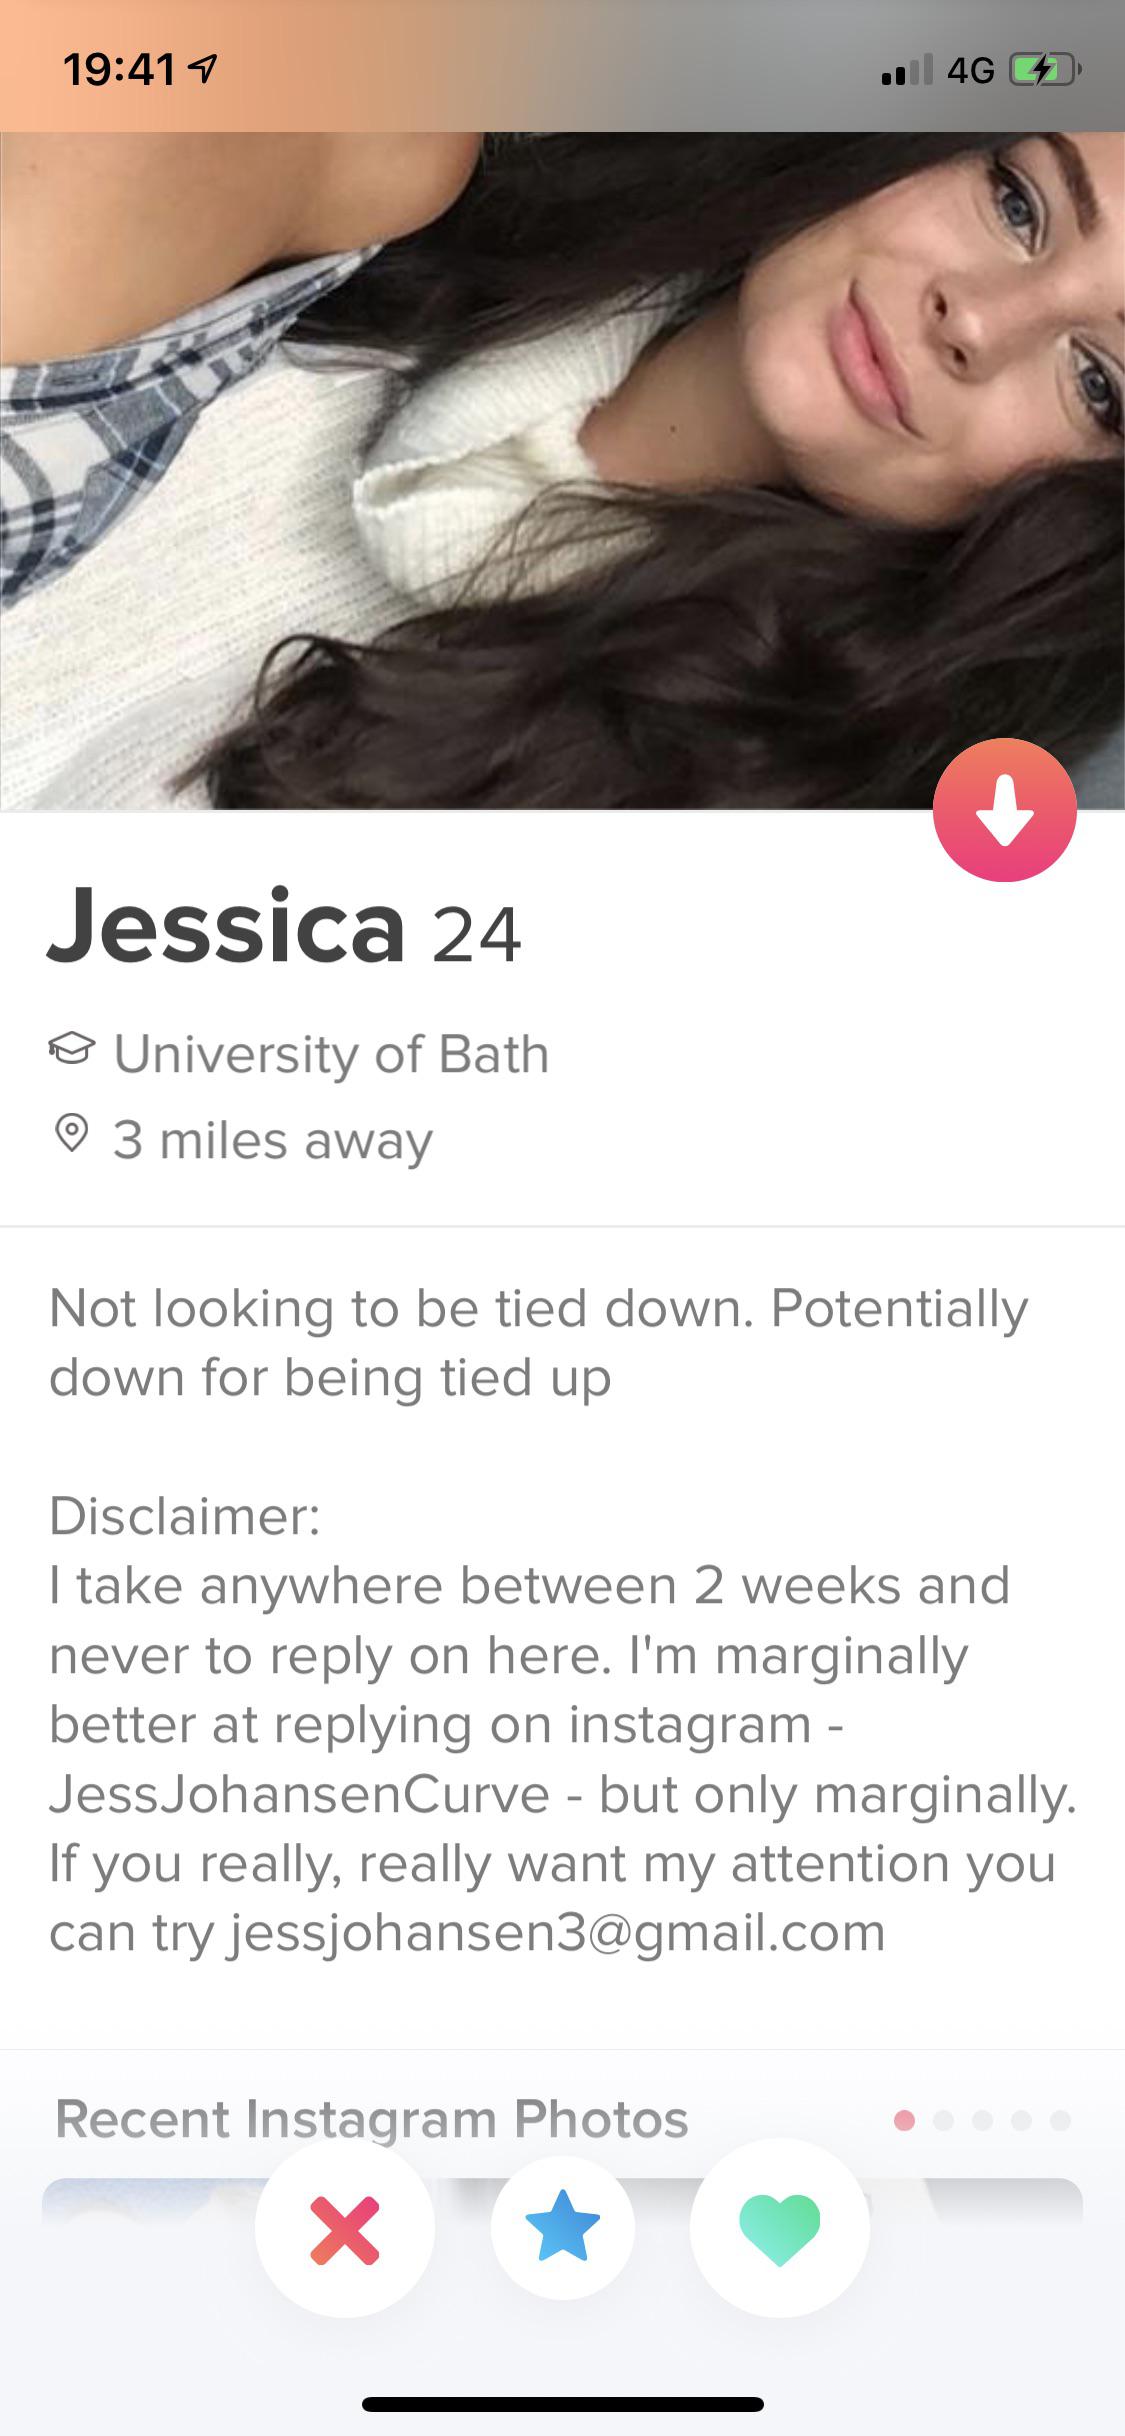 tinder - dark humour dating - .114G Jessica 24 o University of Bath 3 miles away Not looking to be tied down. Potentially down for being tied up Disclaimer I take anywhere between 2 weeks and never to on here. I'm marginally better at ing on instagram Jes